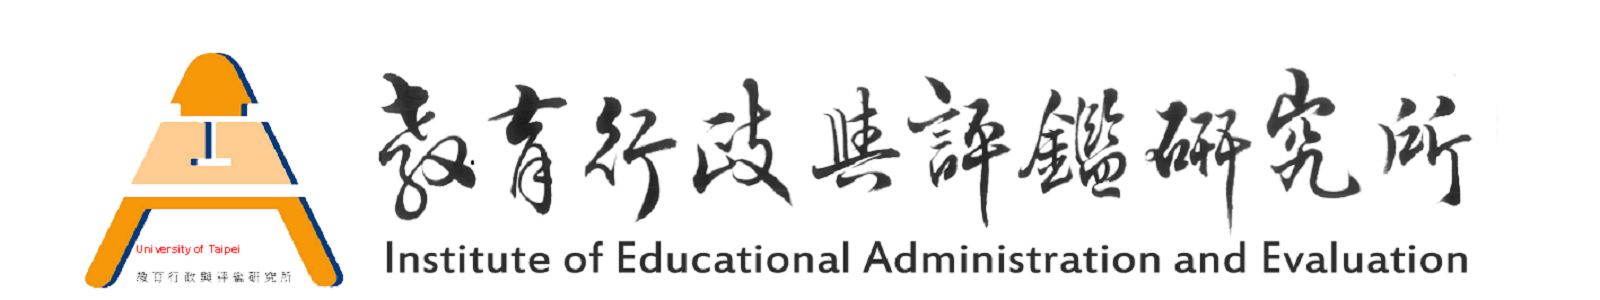 Institute of Educational Administration and Evaluation